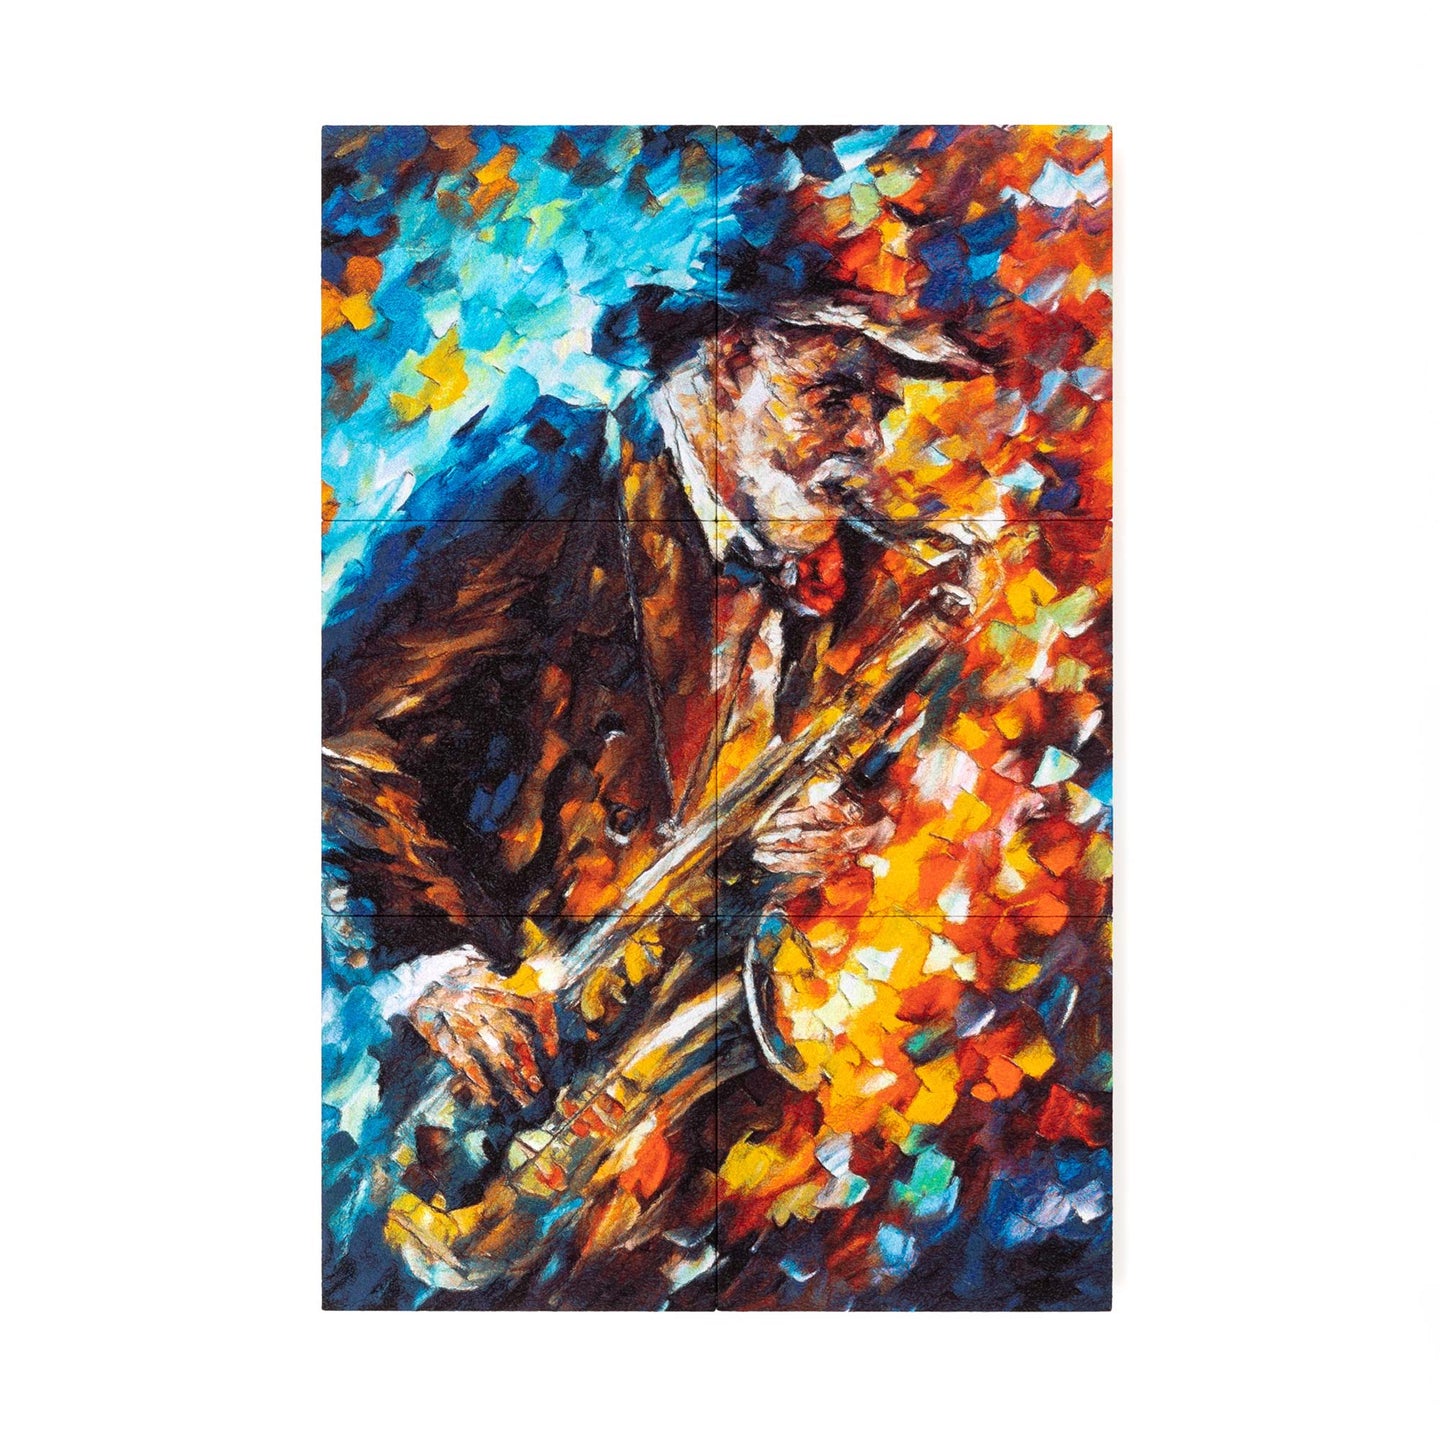 Saxophonist – Set of 6 embroidered canvases